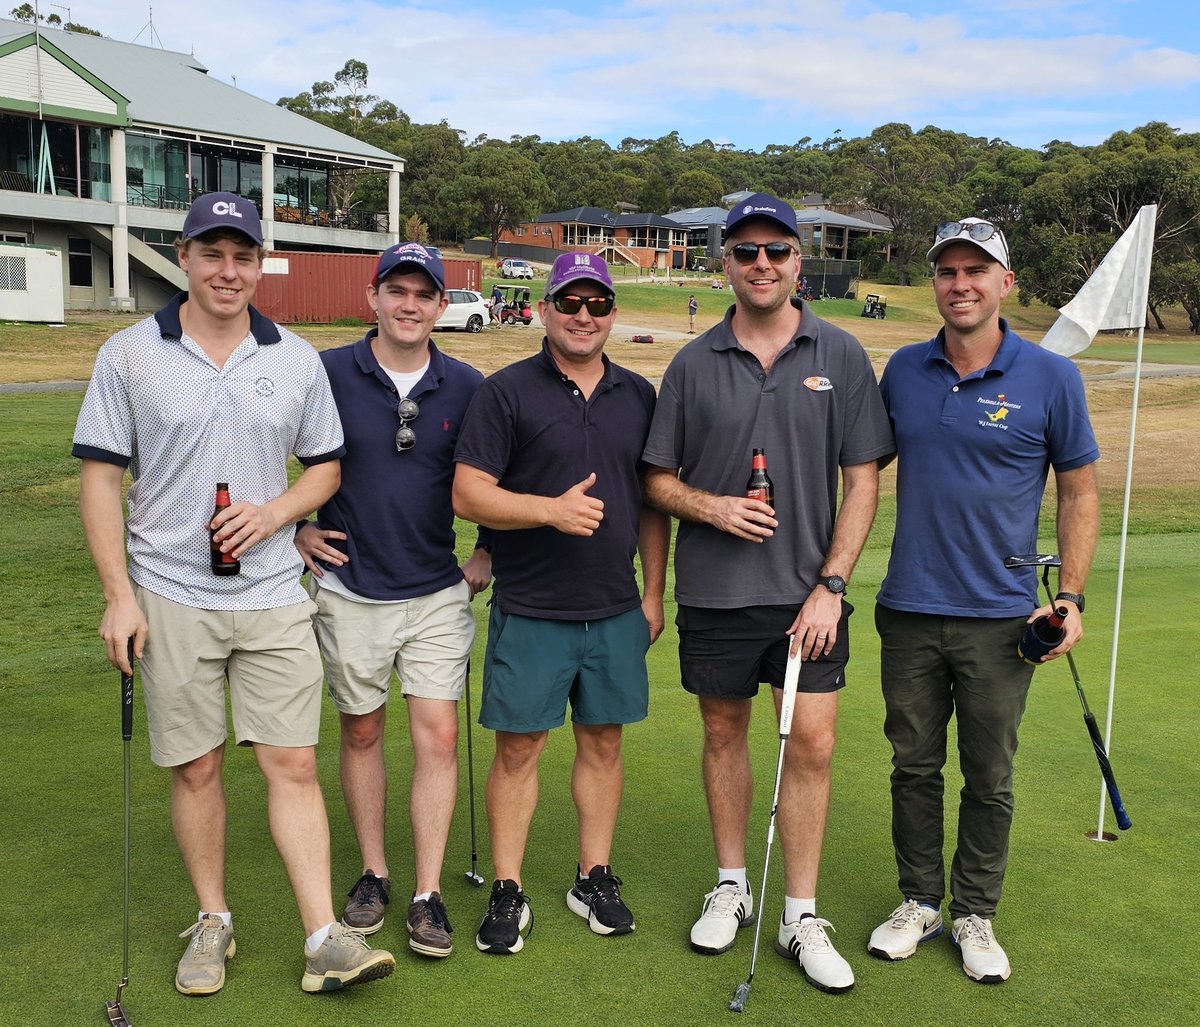 The Annual Grain Industry Association of Victoria Golf day and traders meeting was another success. Congratulations to @steinfort_hugo for being the runner up in the @StoneX_Official putting comp. Great to play with @CHSBroadbent @RiordanGrains and @GrainCorp to name a few.